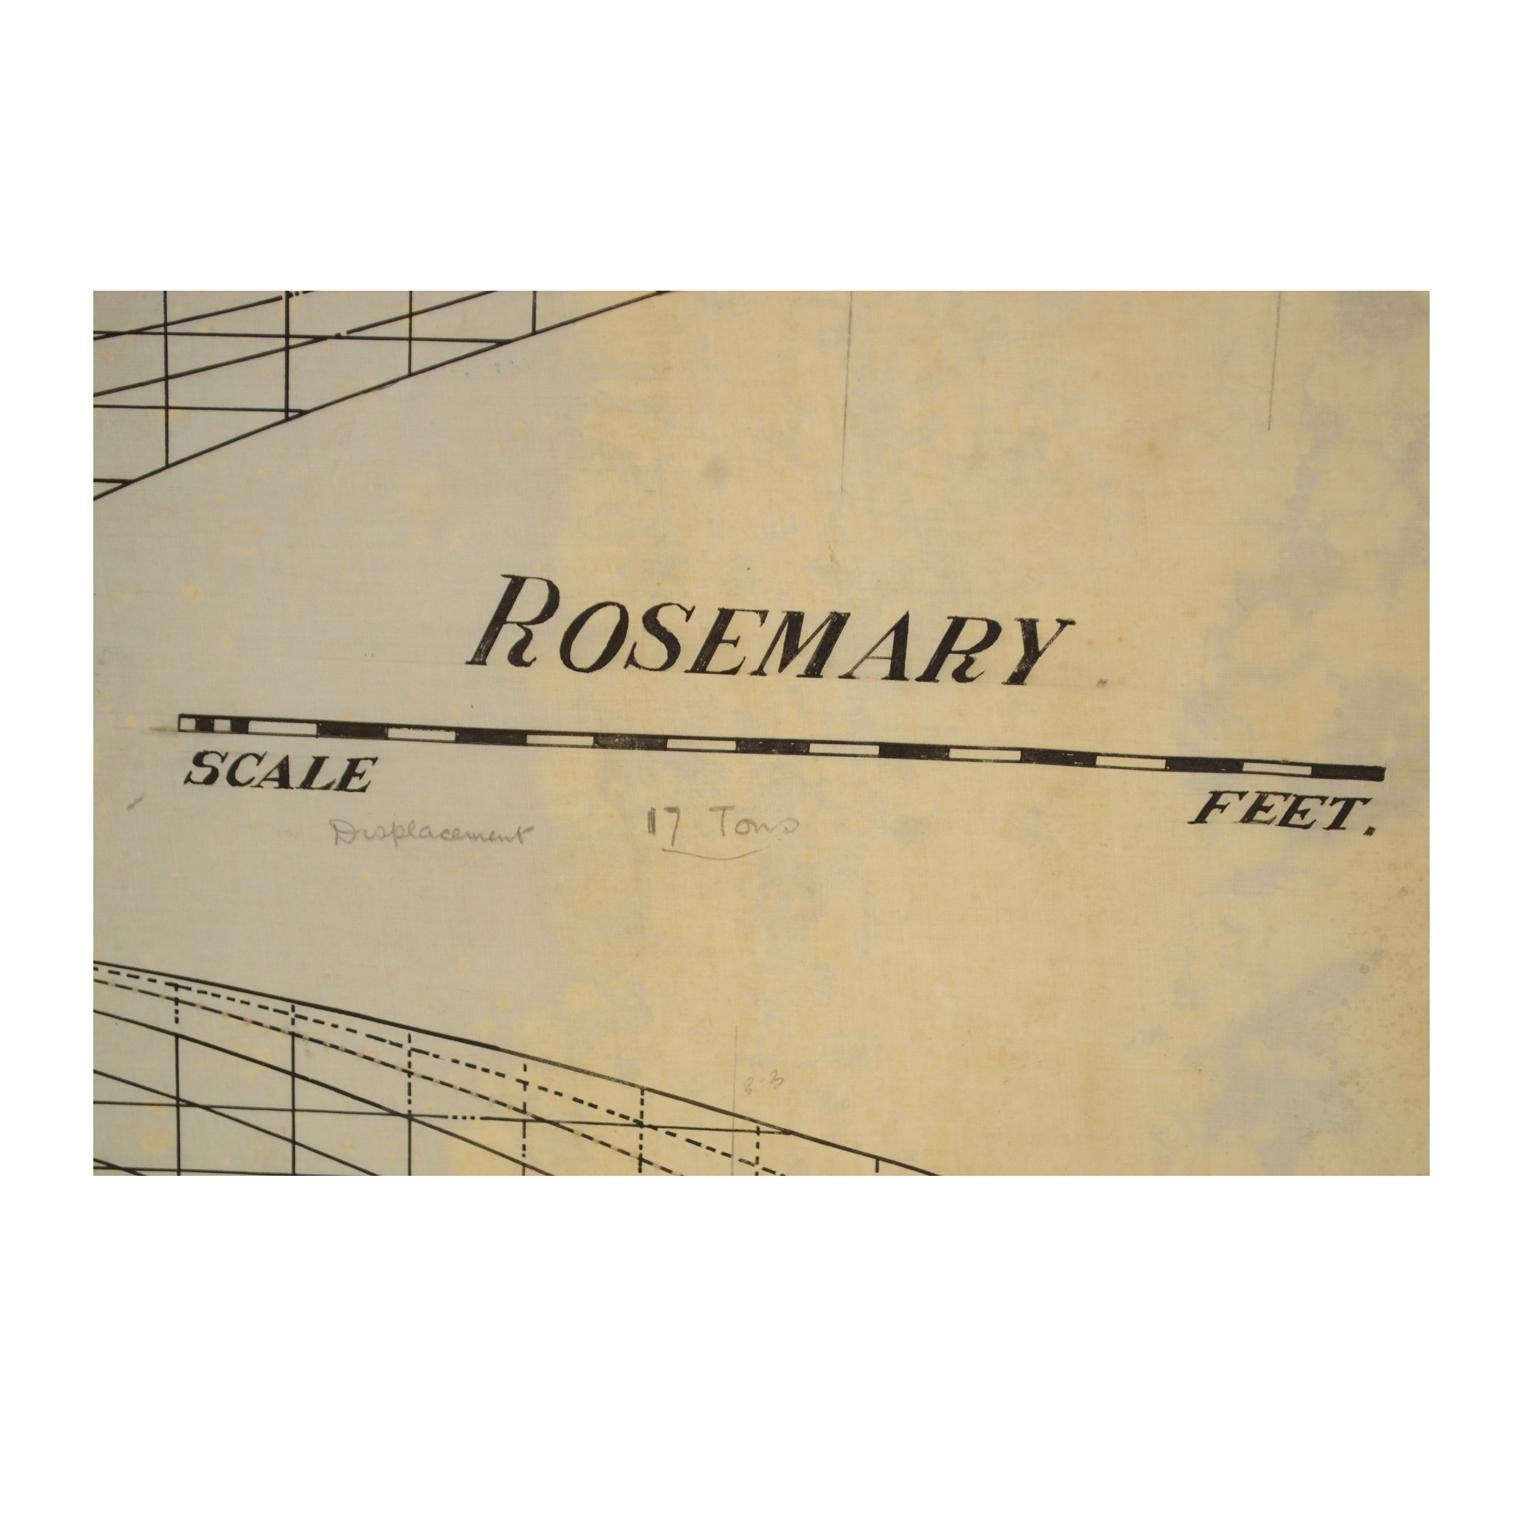 Rosemary is a project by William Fife III and it was launched in his Scottish shipyard in 1925. This boat has a sloop rig. cm 104.6 x 42.5 (H) - inches 41.18 x 16.73 (H).
Project coming from the archives of Uffa Fox, an English boat designer and